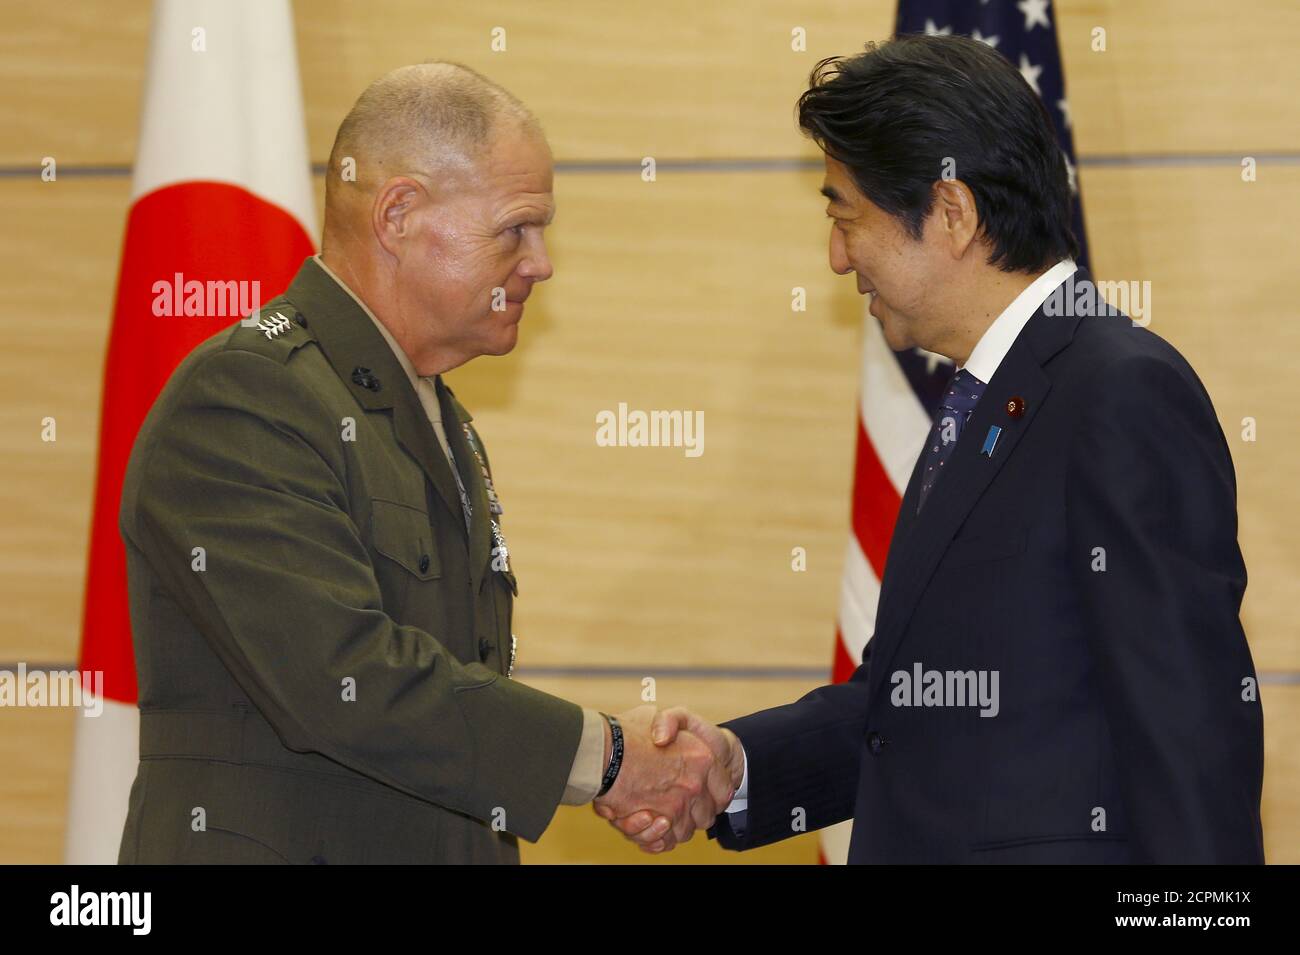 Gen. Robert B. Neller, Commandant of the U.S. Marine Corps, is greeted by Japanese Prime Minister Shinzo Abe prior to a meeting at Abe's official residence in Tokyo, November 25, 2015. REUTERS/Shizuo Kambayashi/Pool Stock Photo